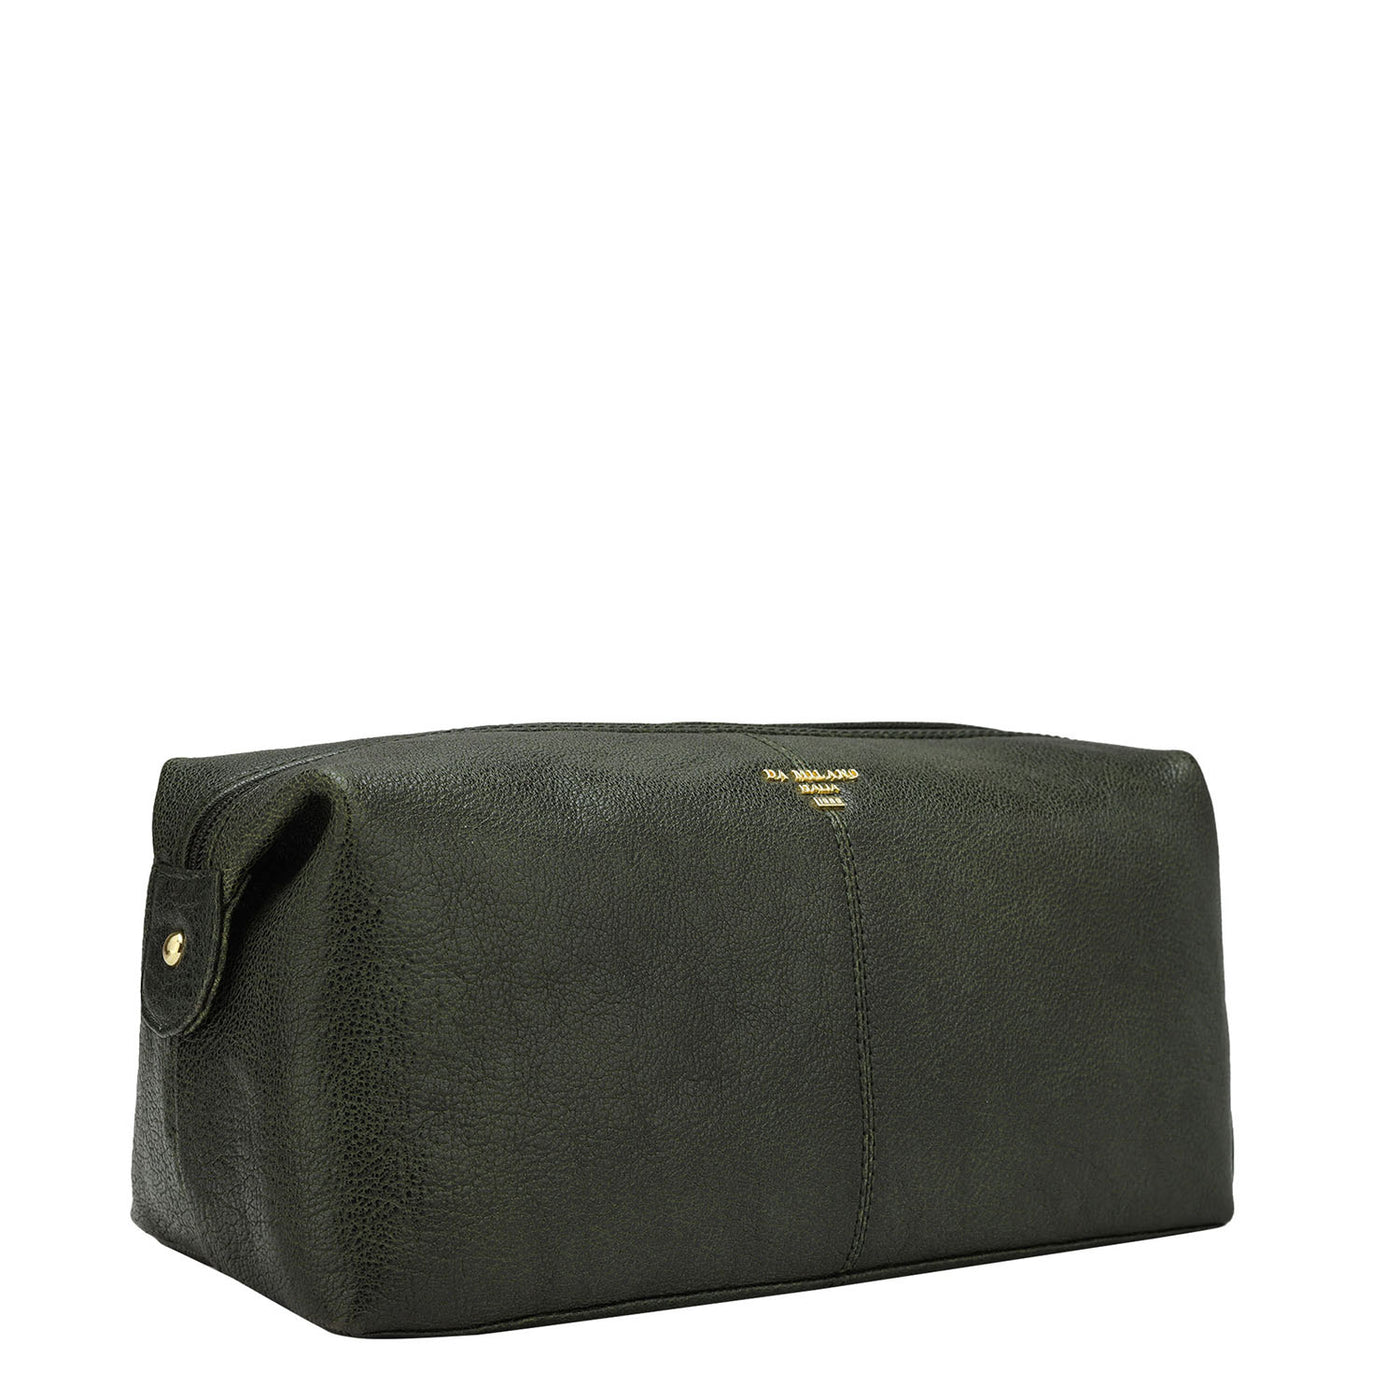 Elephant Pattern Leather Vanity Pouch - Green